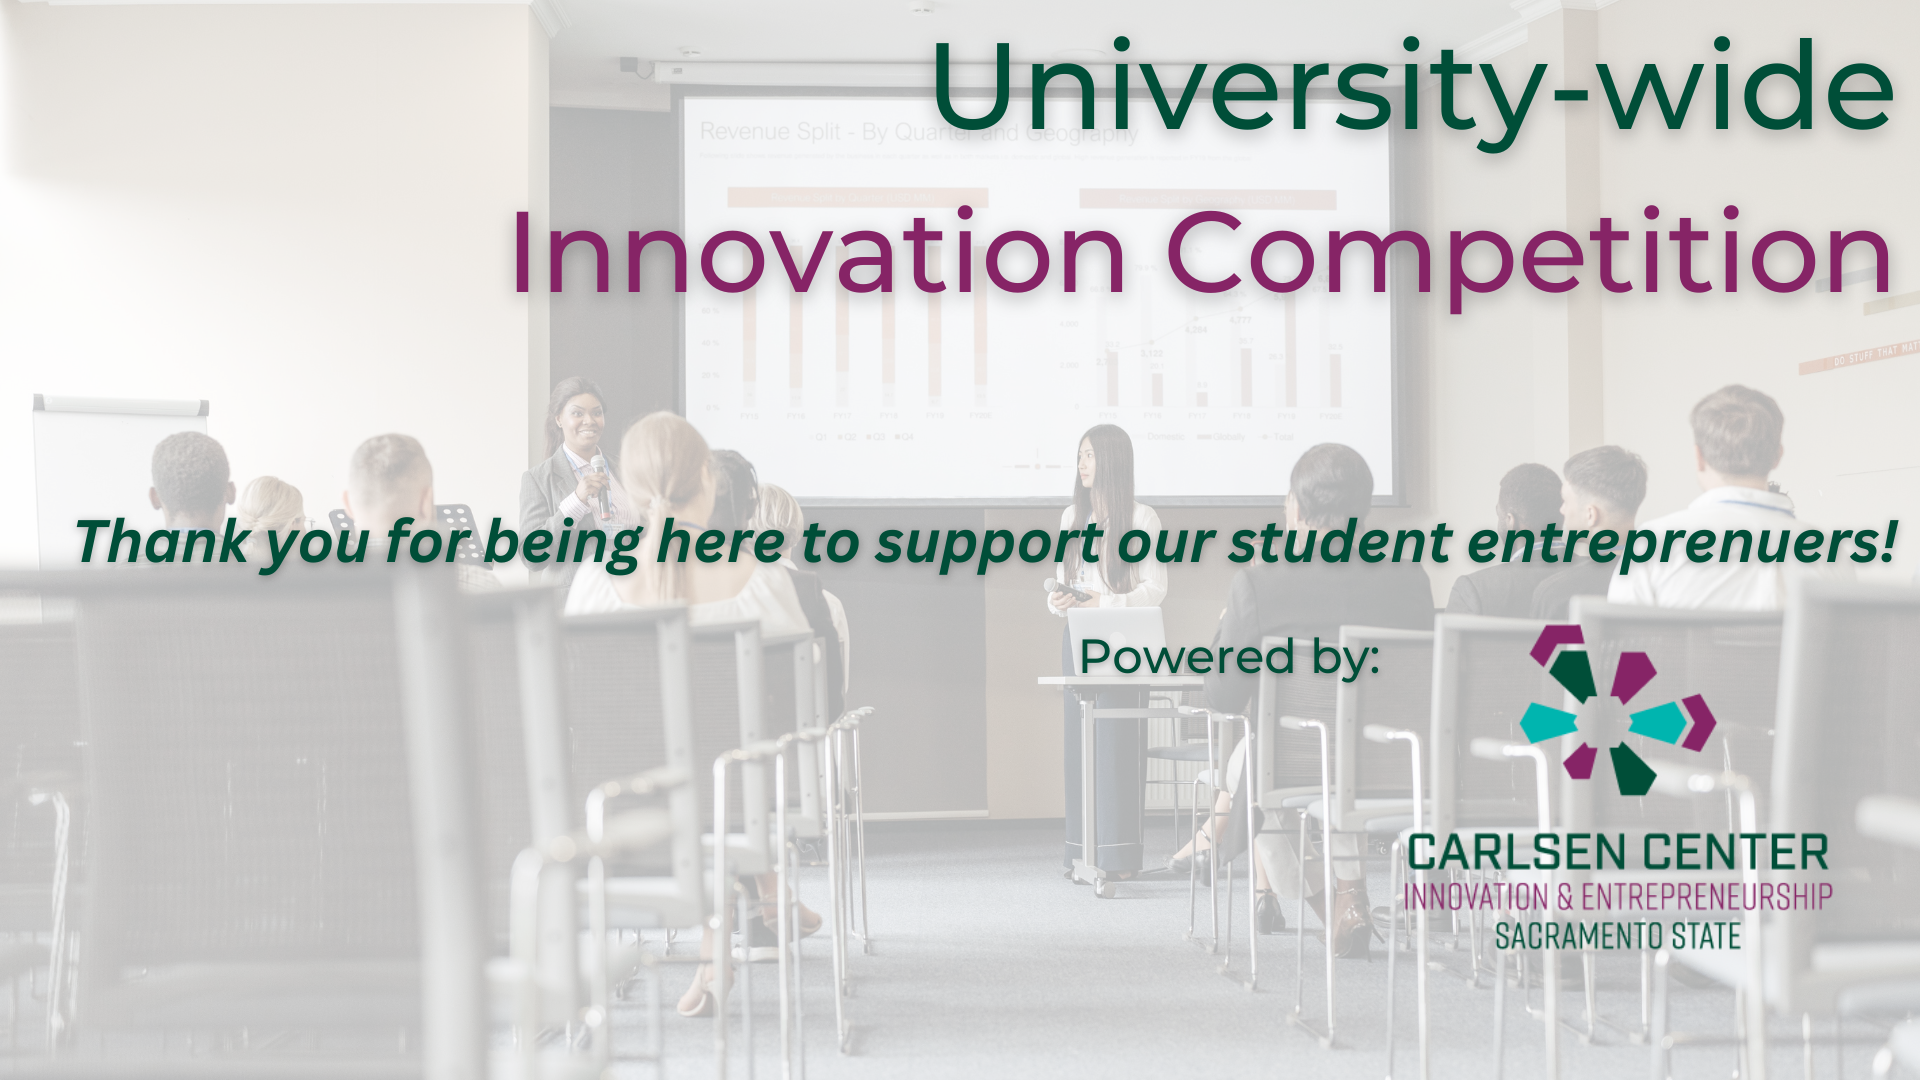 University-wide Innovation Competition title